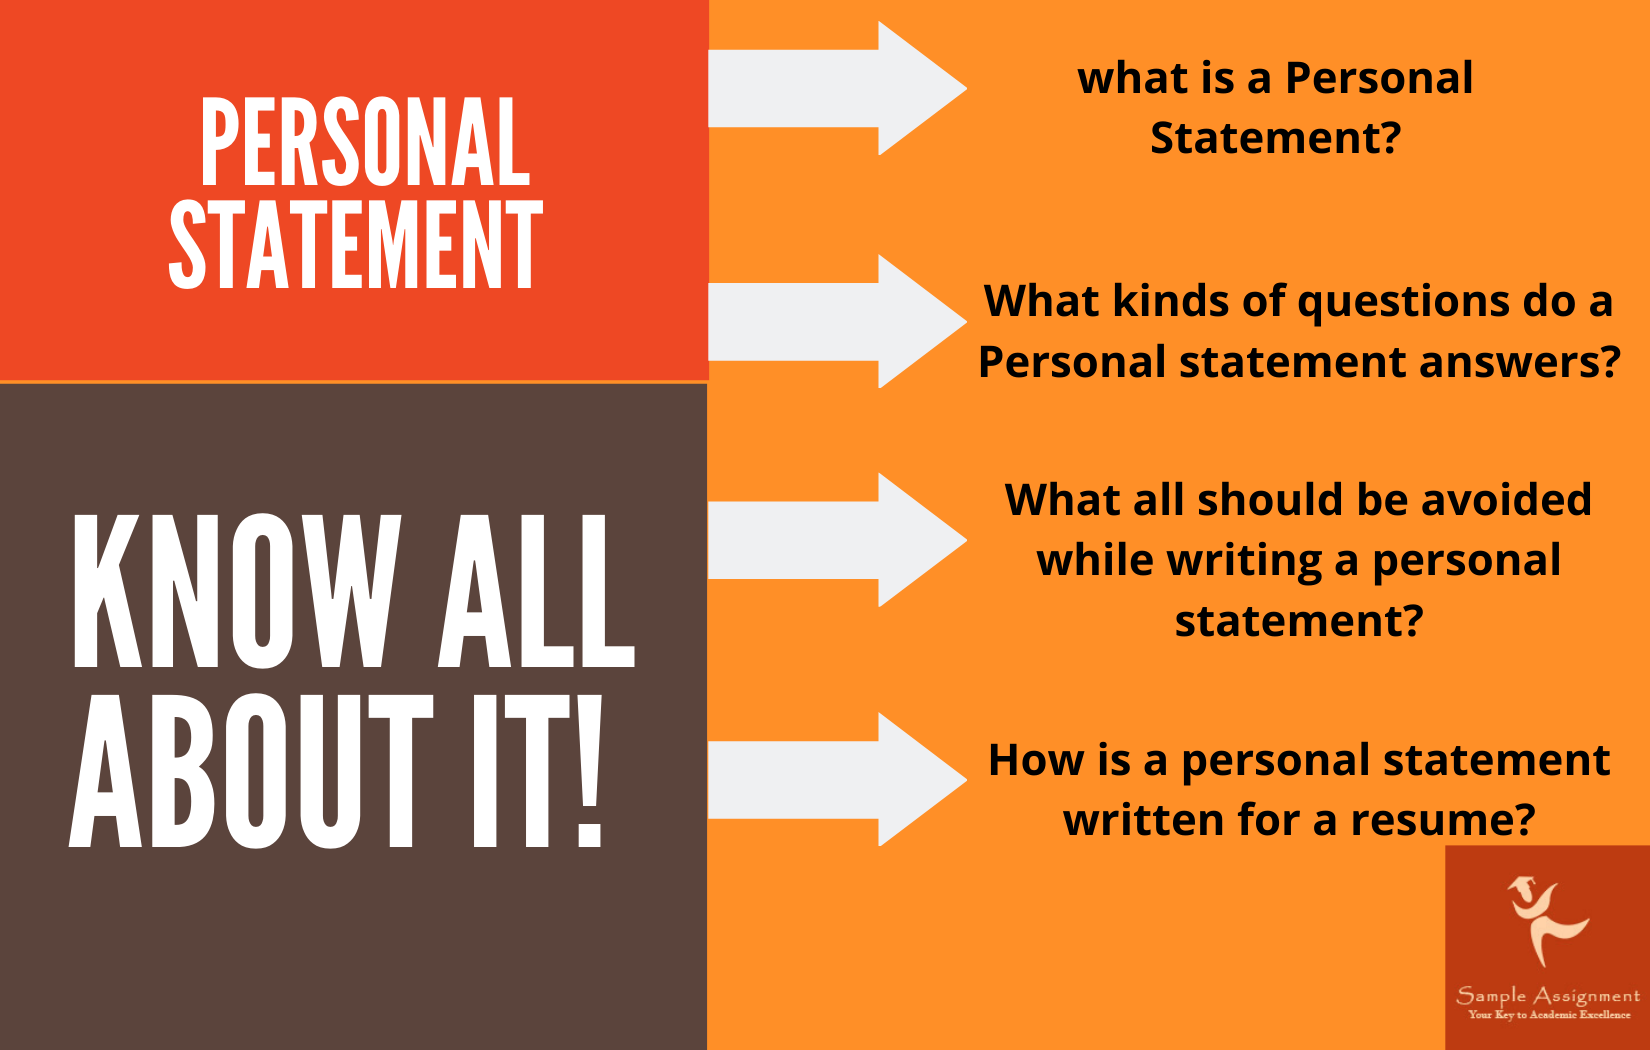 Personal Statement Writing Services